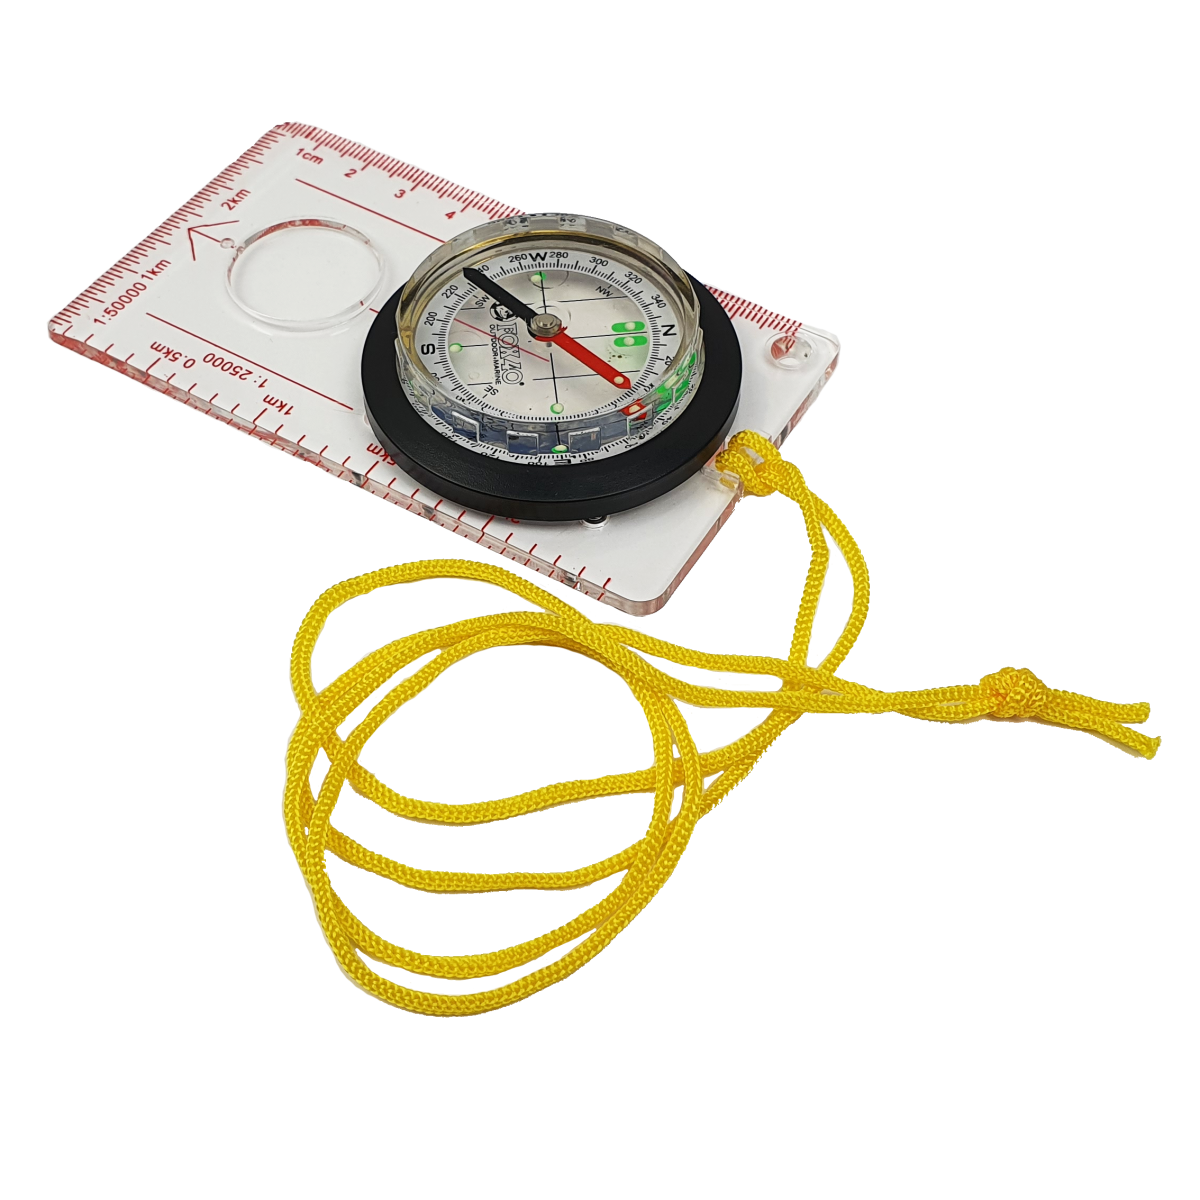 Boating Safety Pack Compass